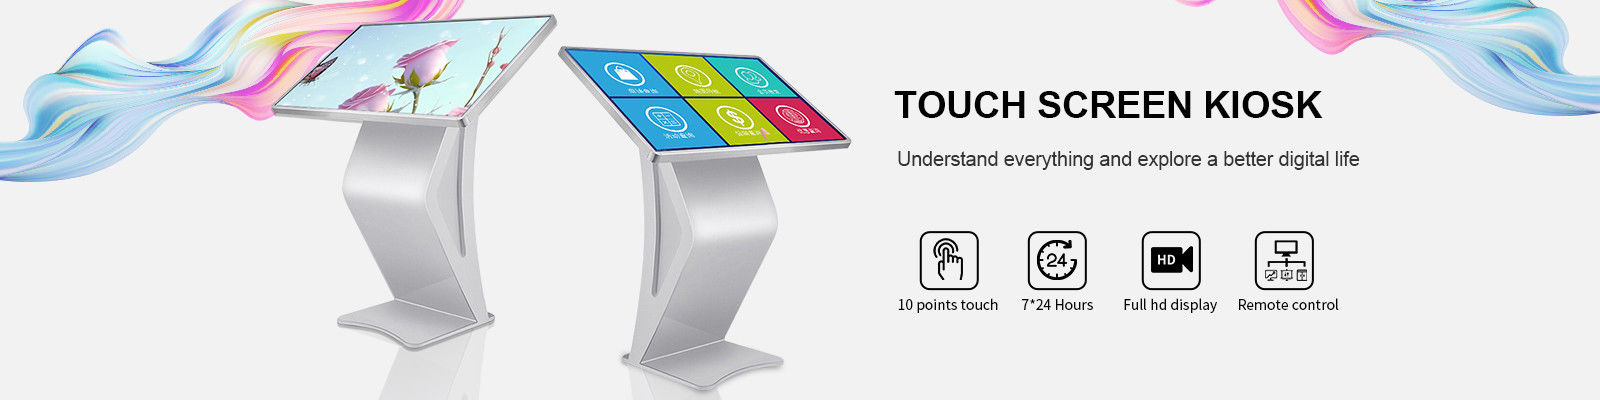 Touch screenkiosk